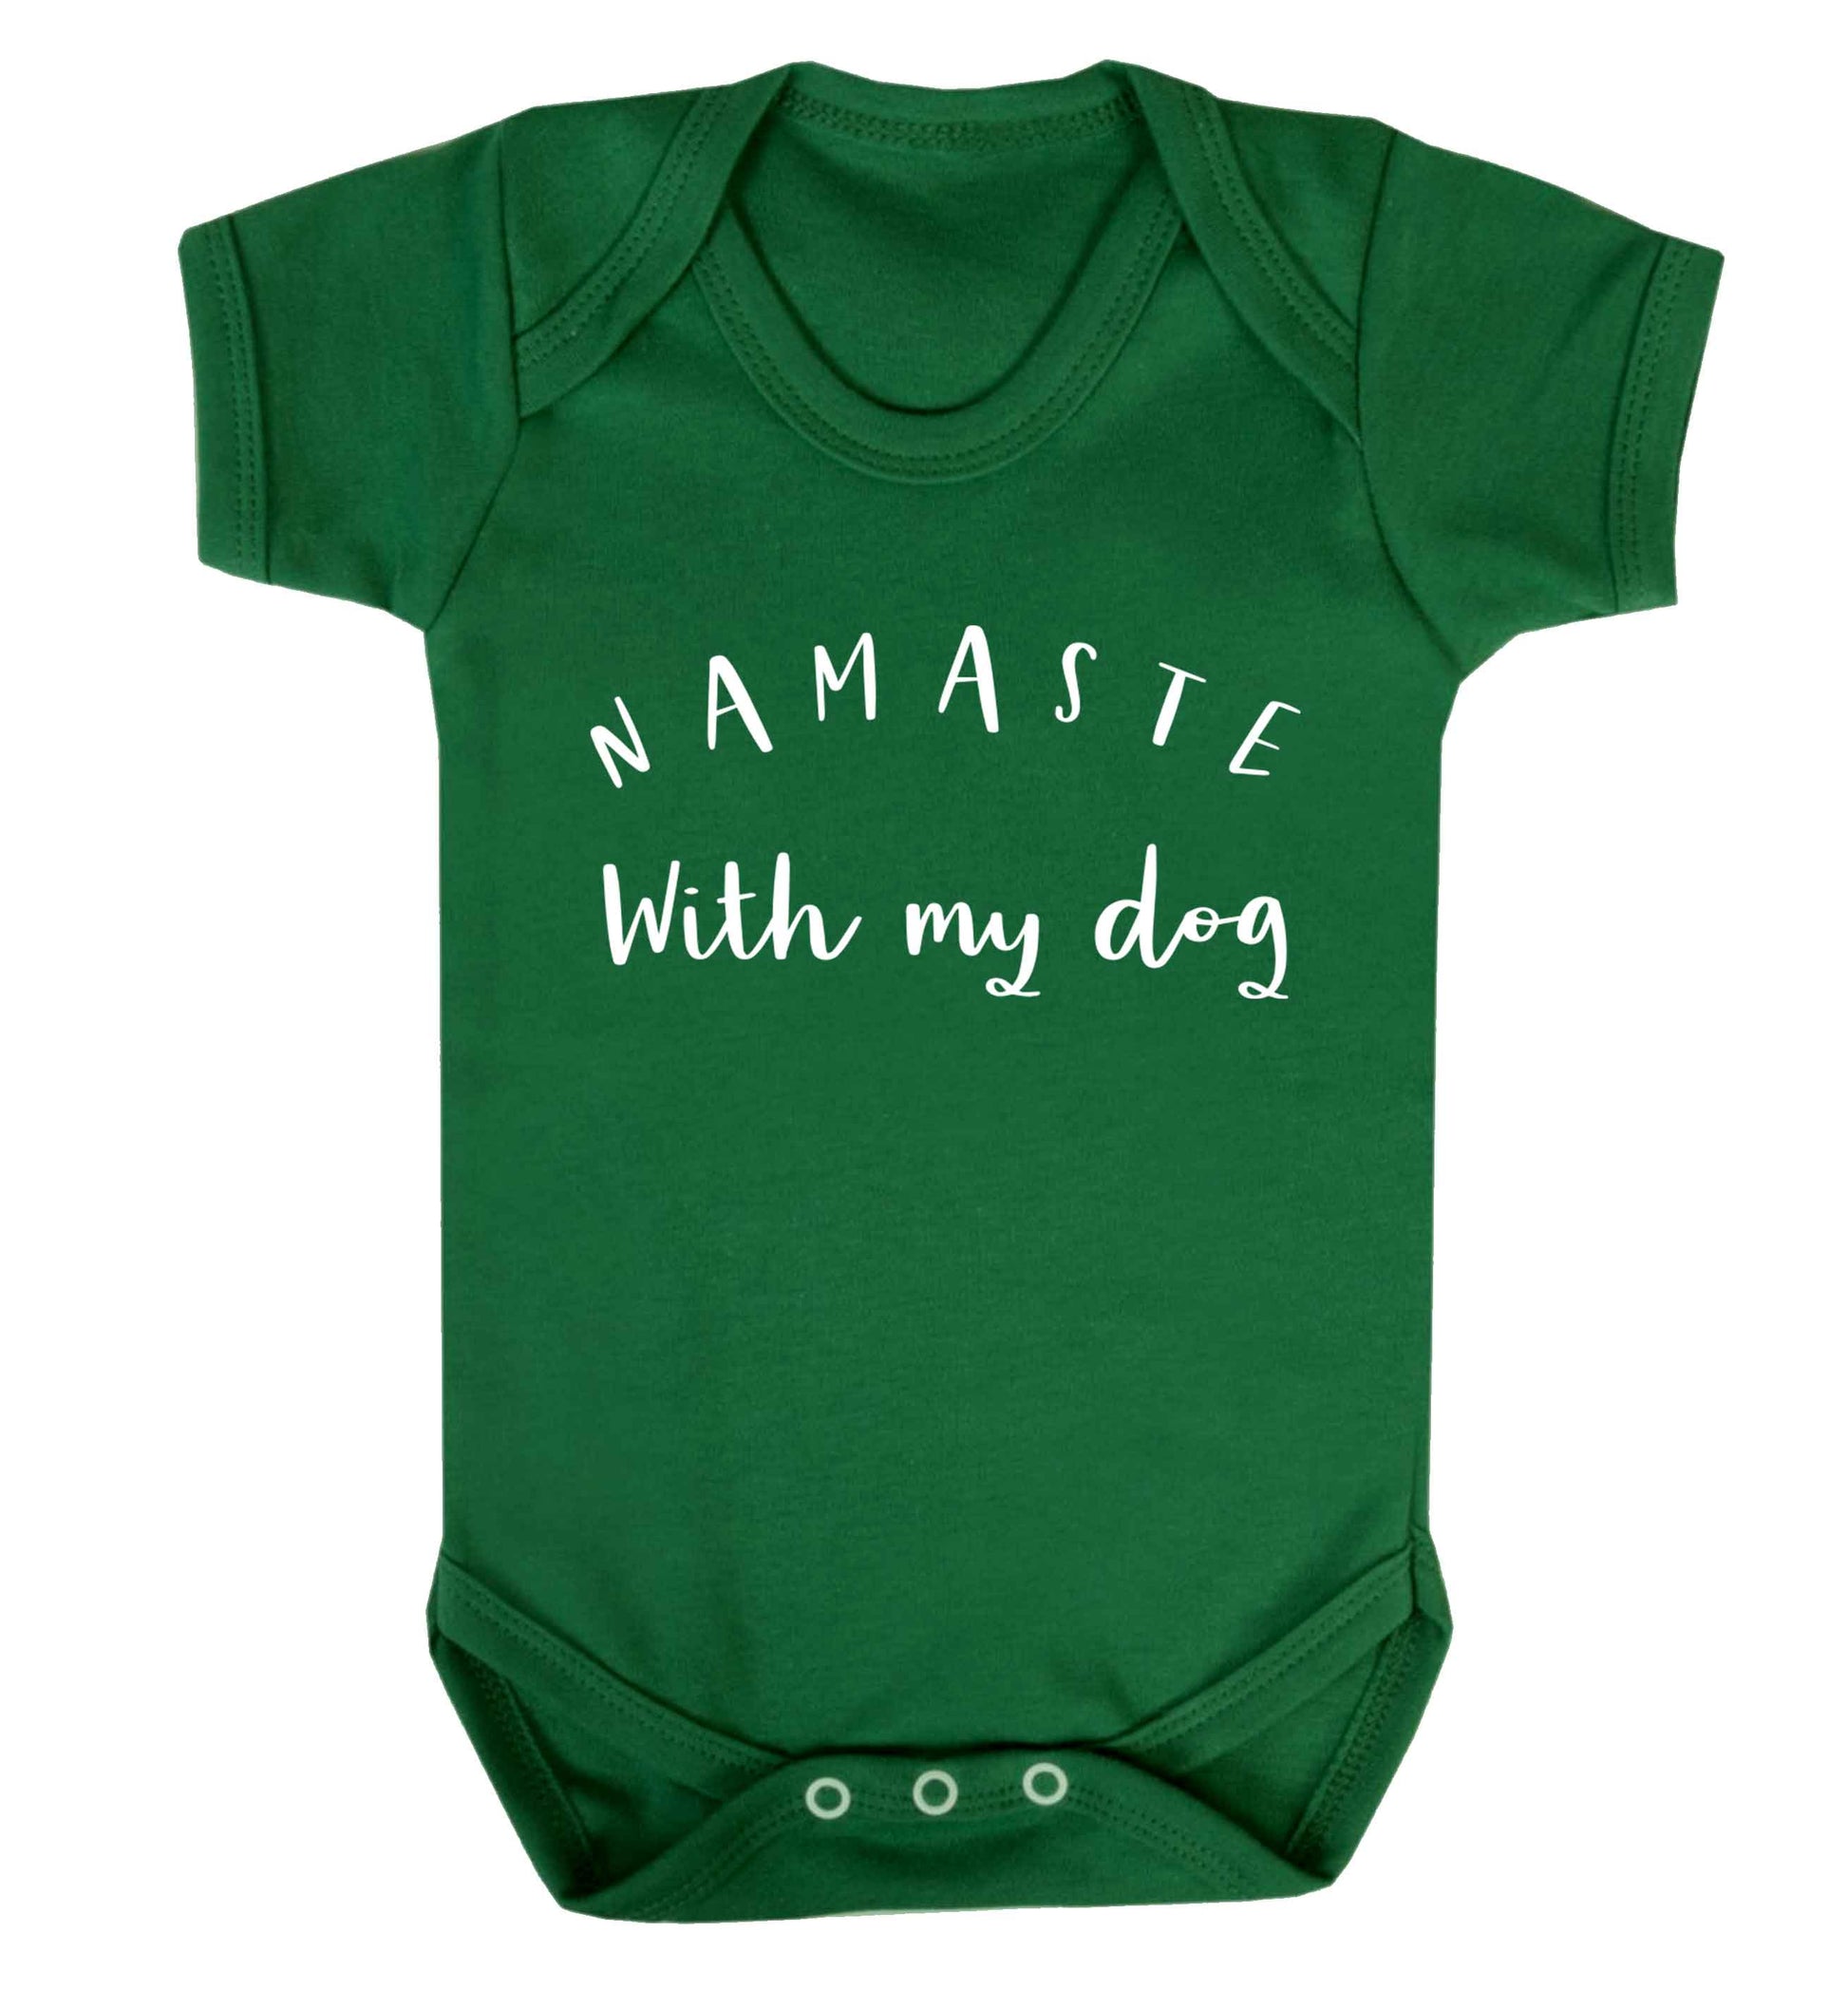 Namaste with my dog Baby Vest green 18-24 months